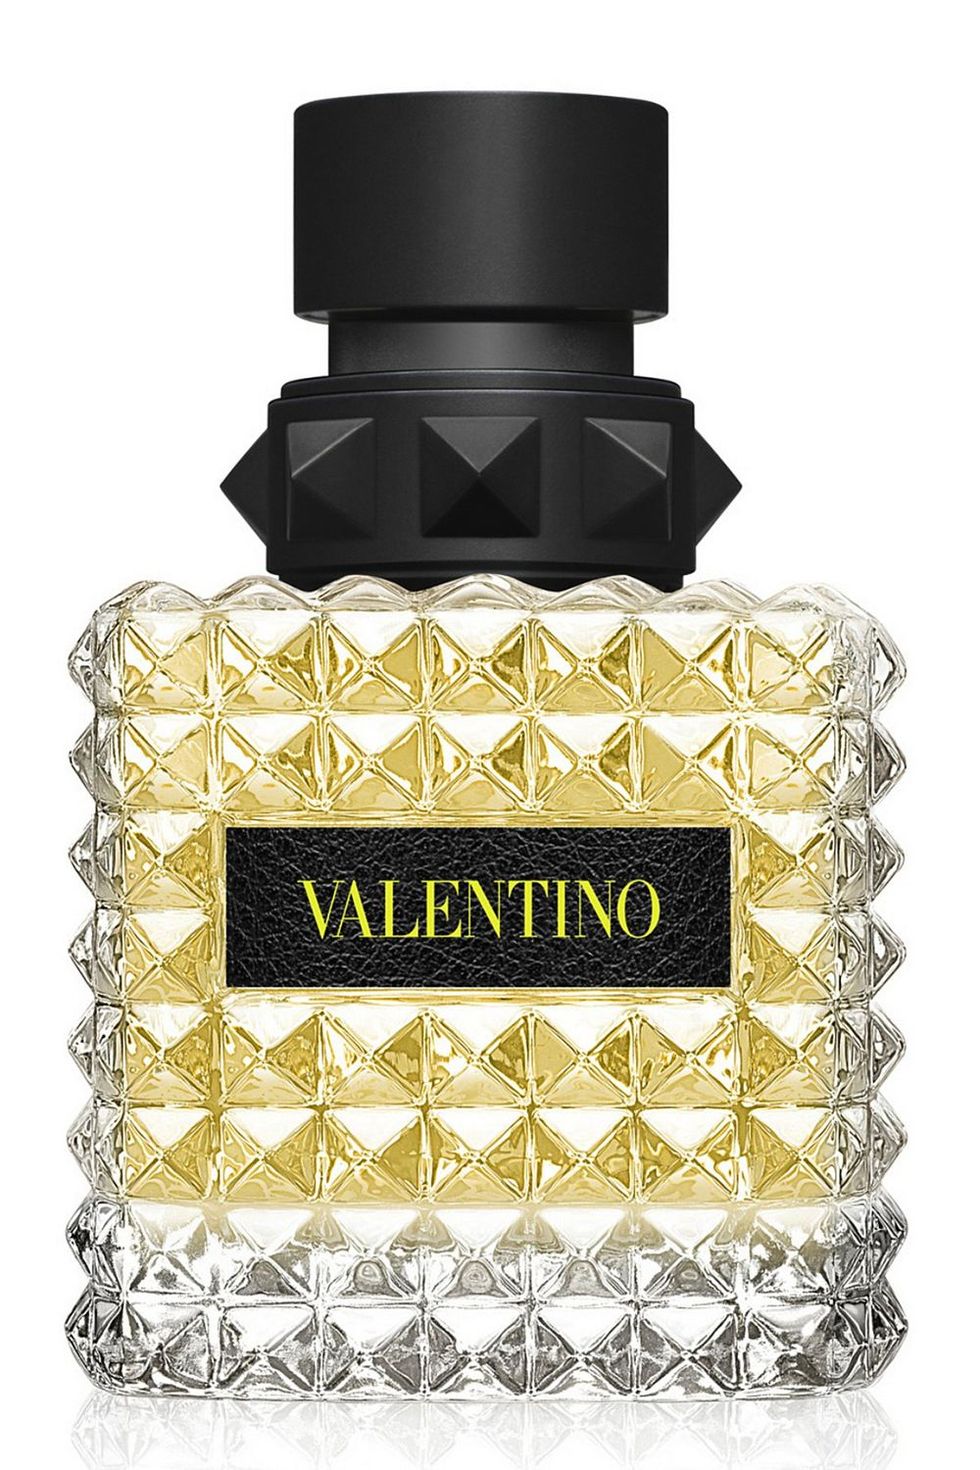 8 balmy perfumes to wear this summer